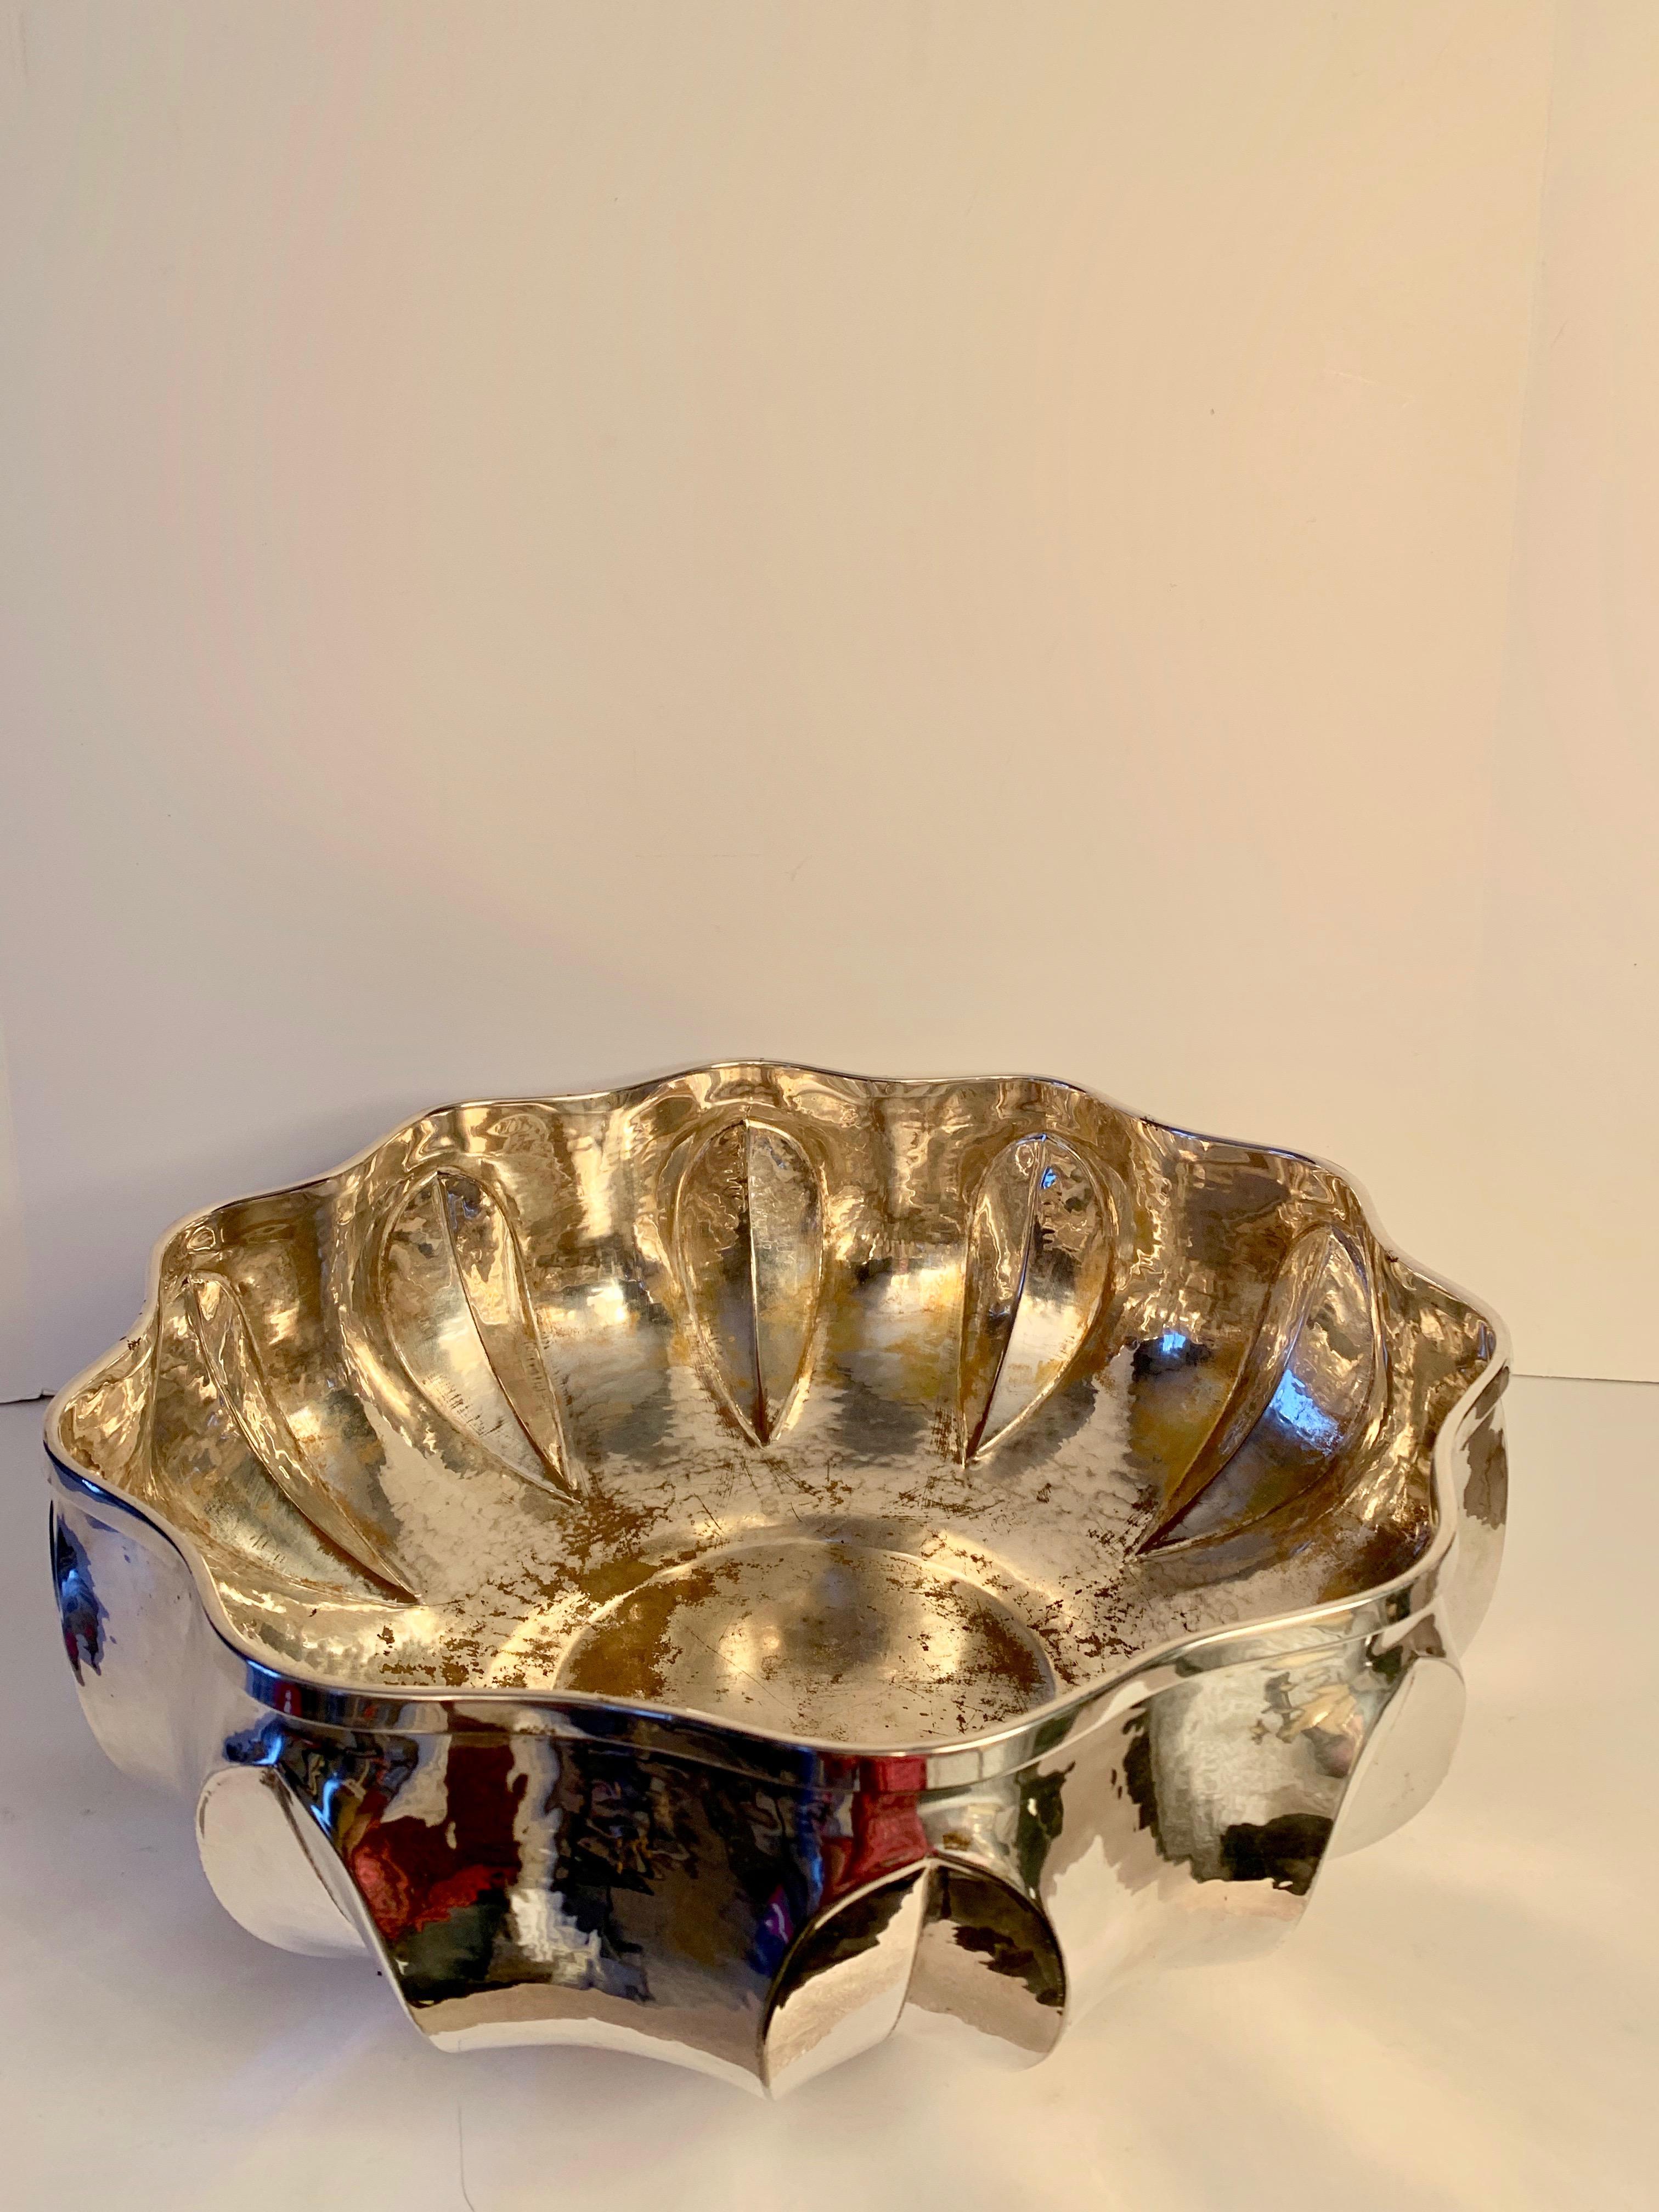 20th Century Silver Plate Center Piece Bowl